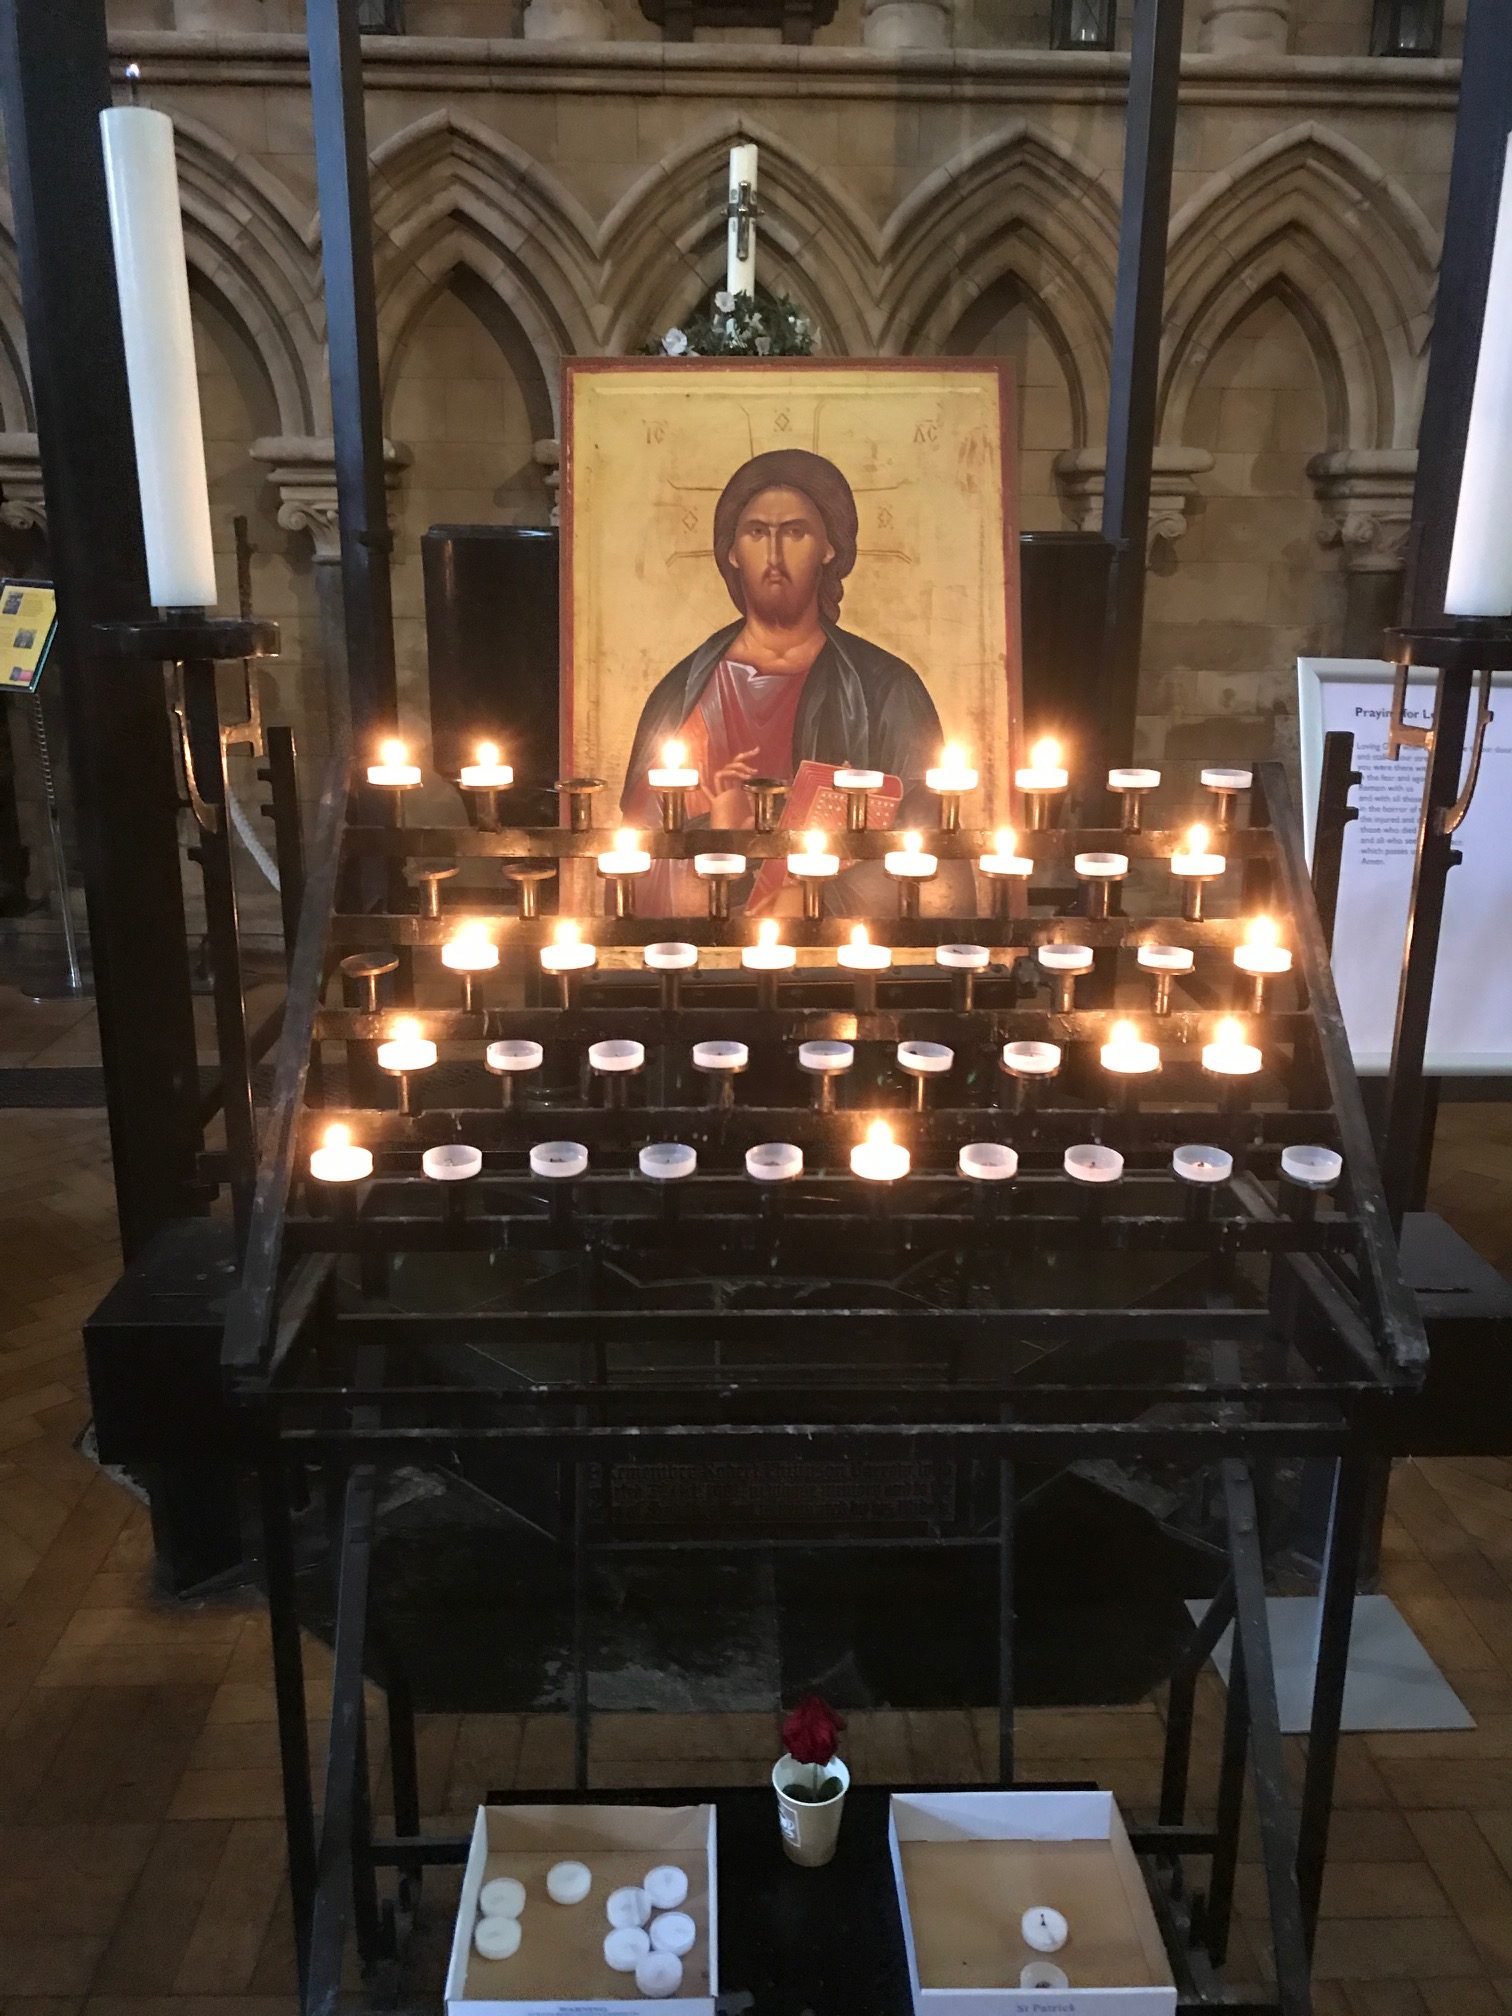 Seaside Holiday: Lighting a Candle for Diddley - Southwark Cathedral London